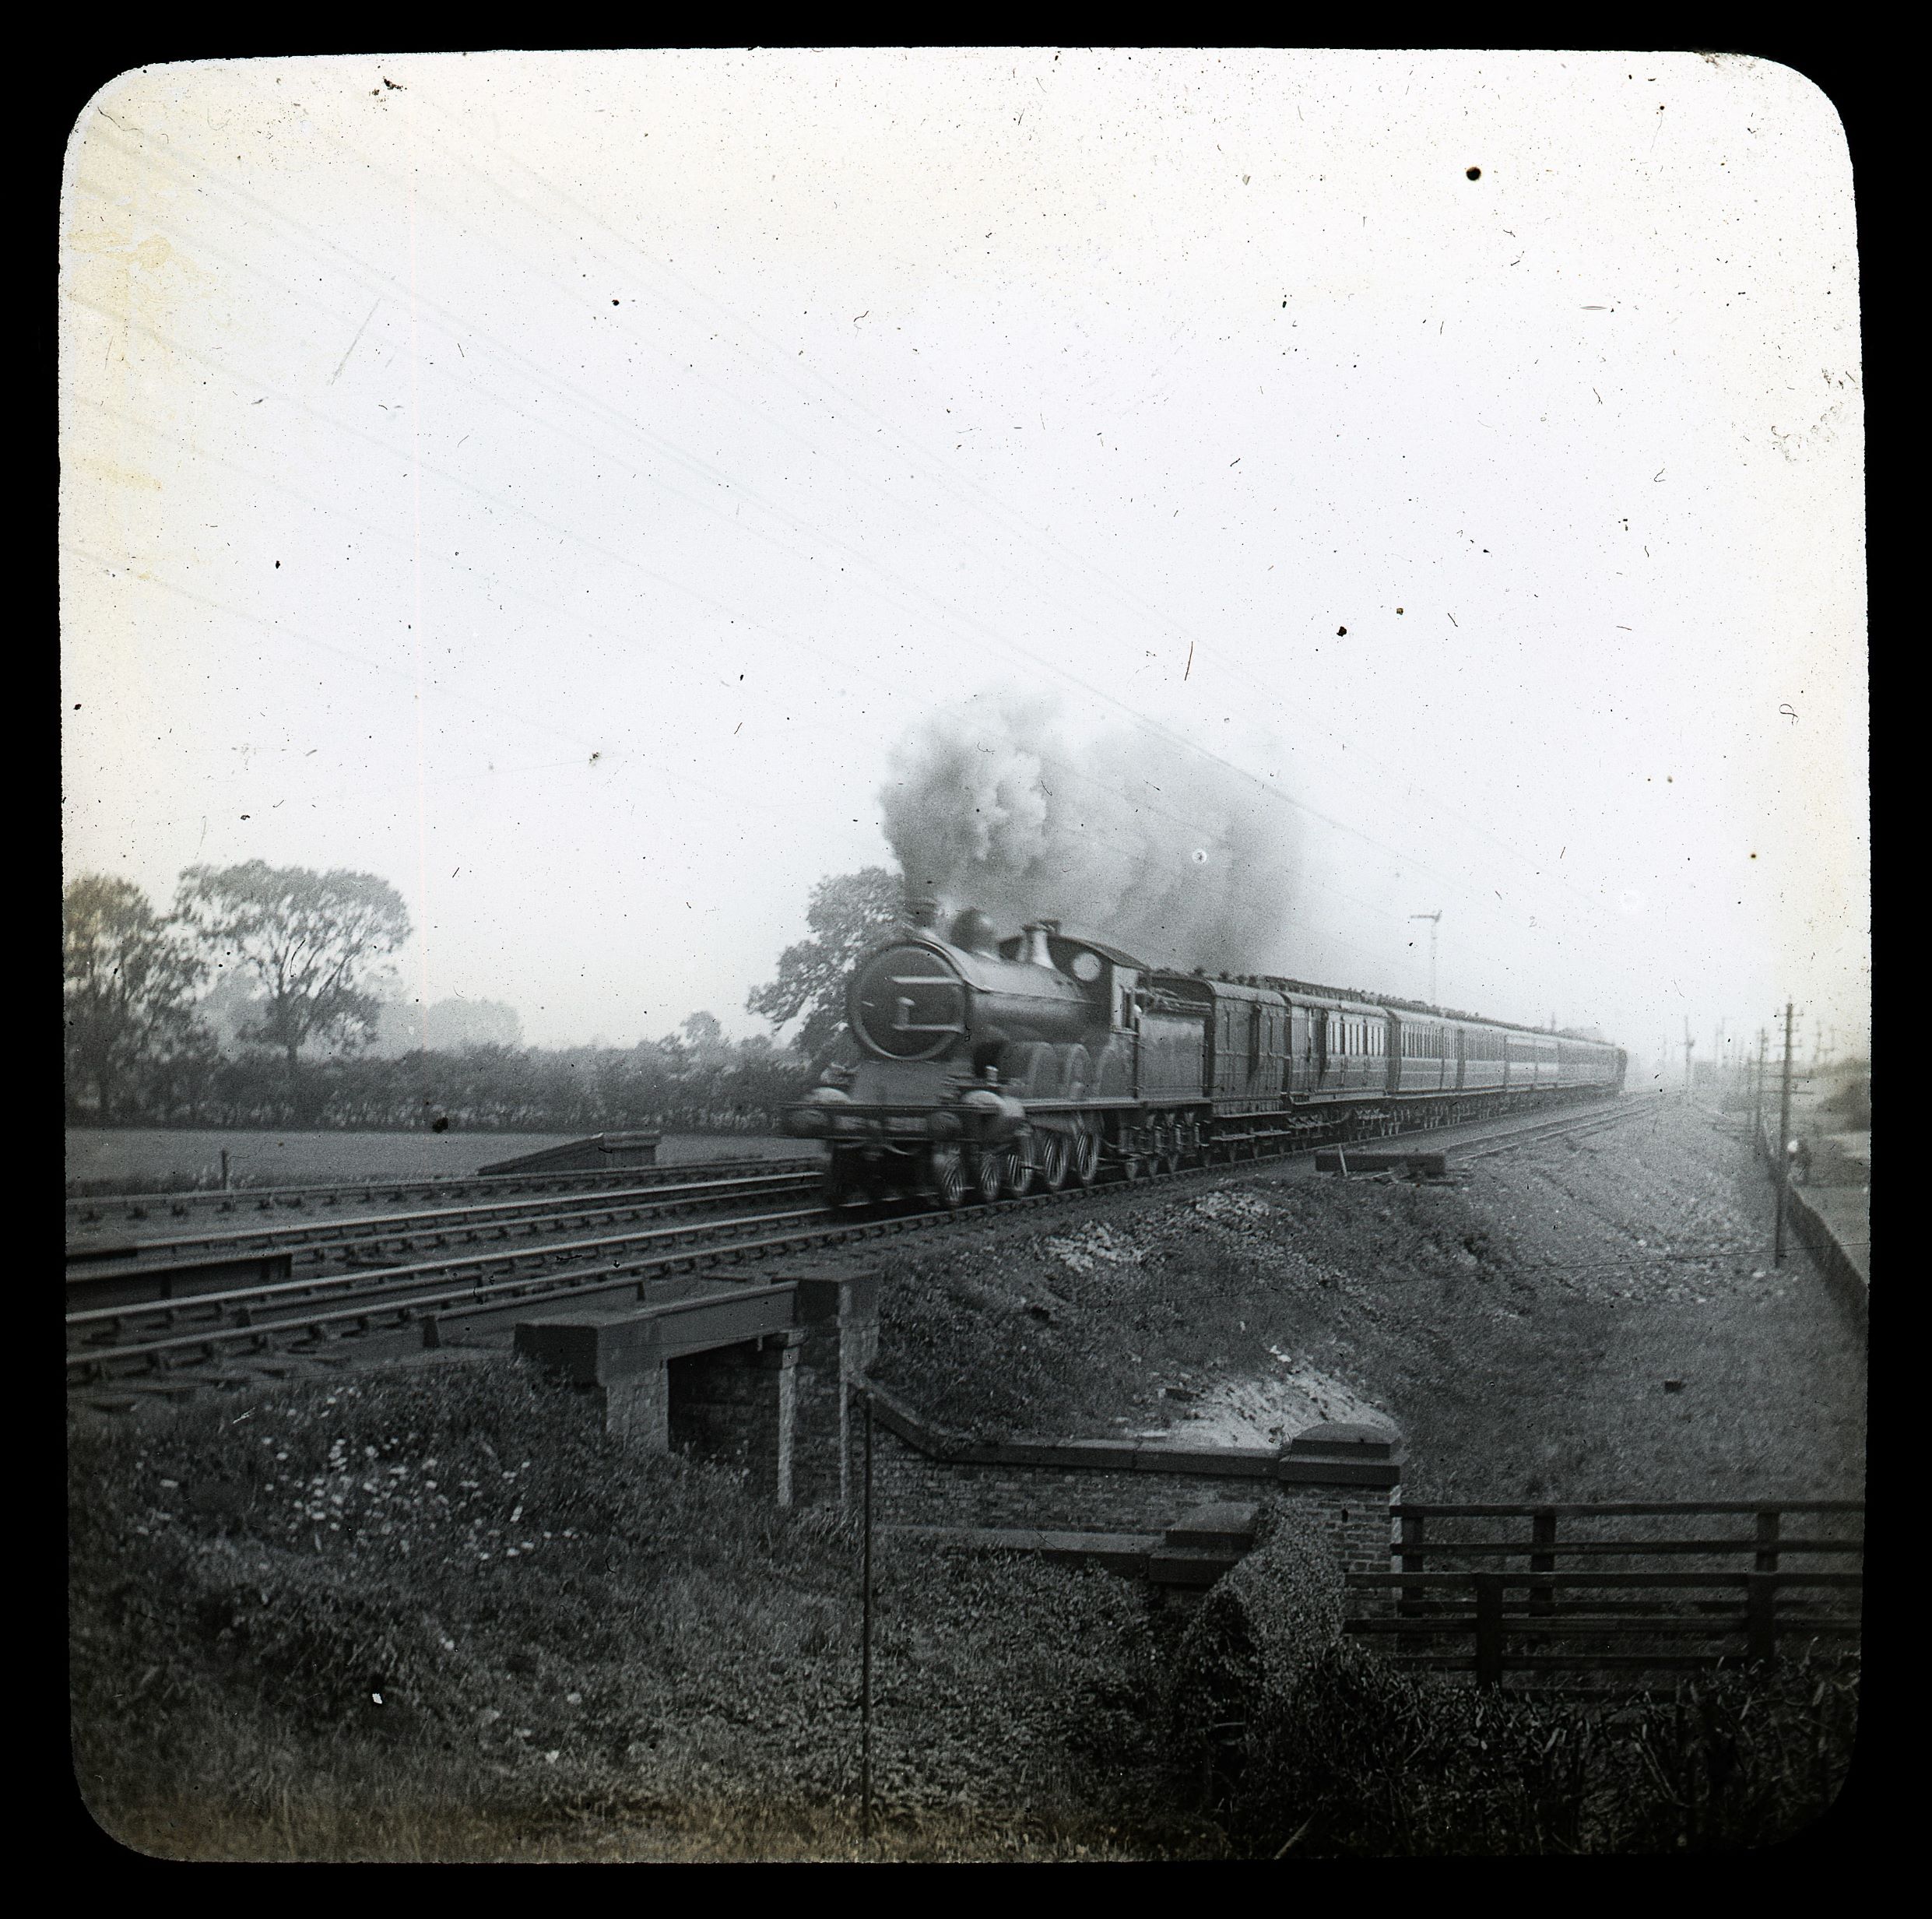 A stream train thunders along. From the Scruton Lantern Slides collection.